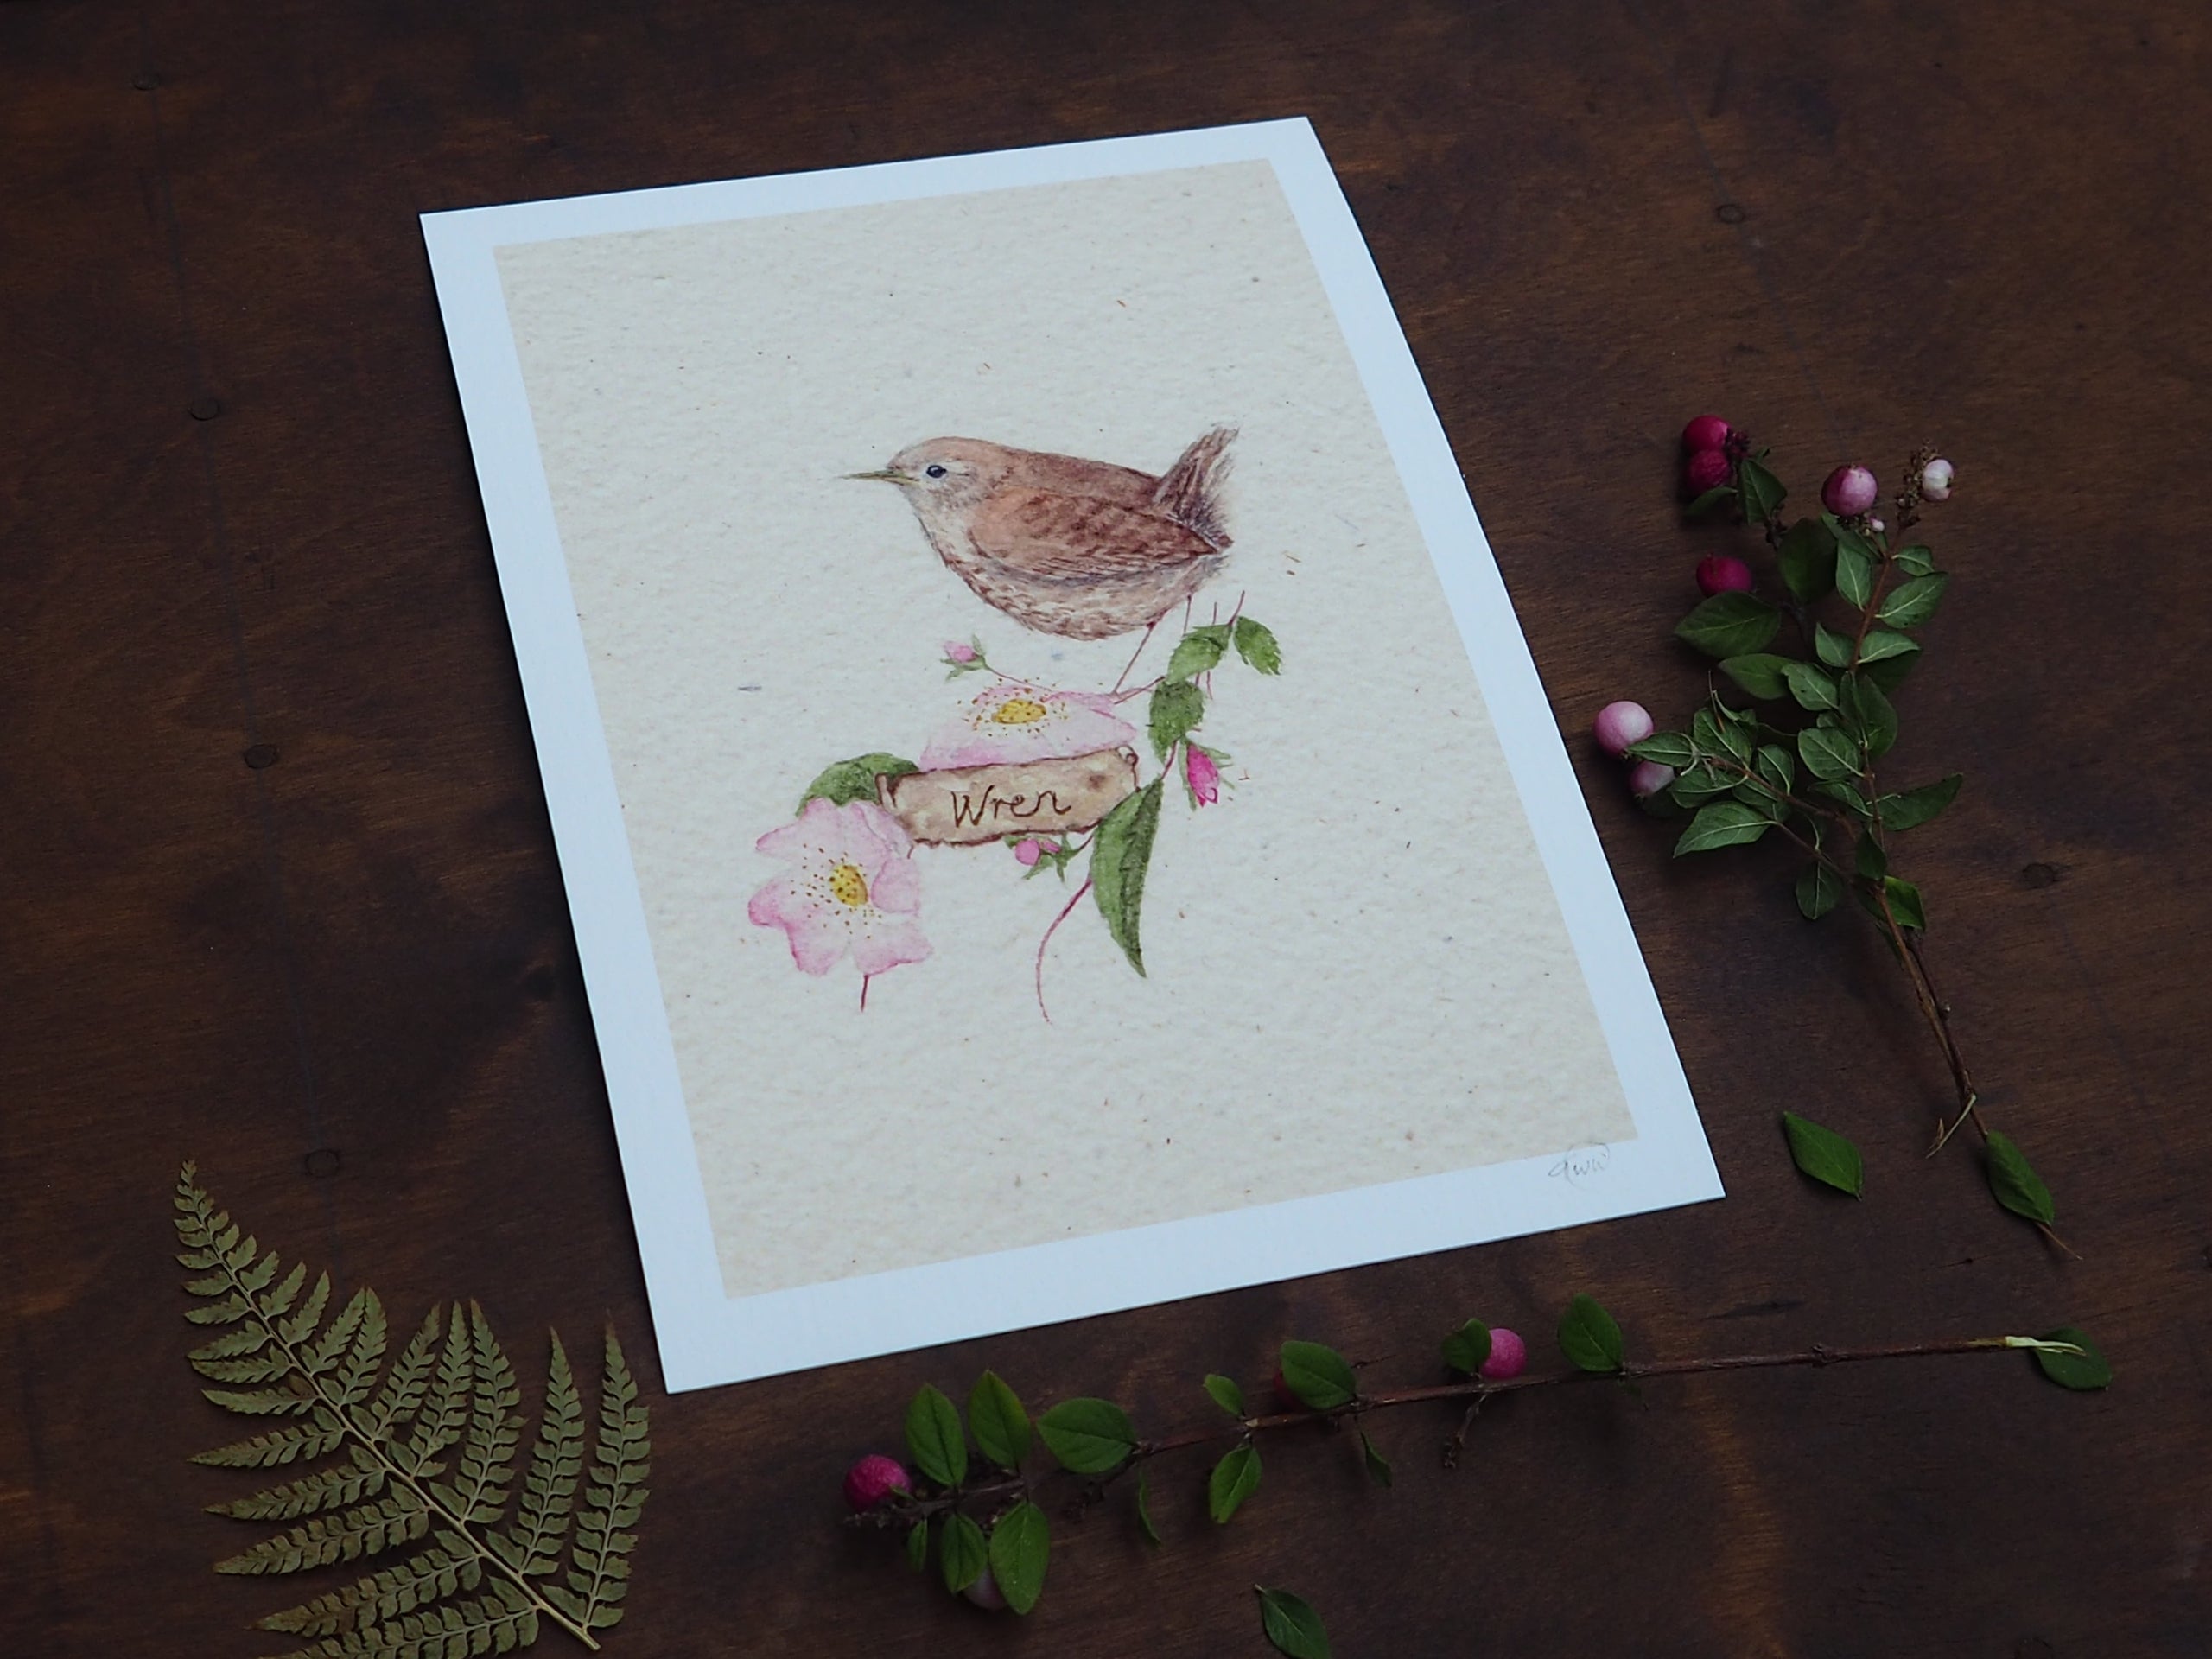 Wren in the Wild Roses (annotated version)